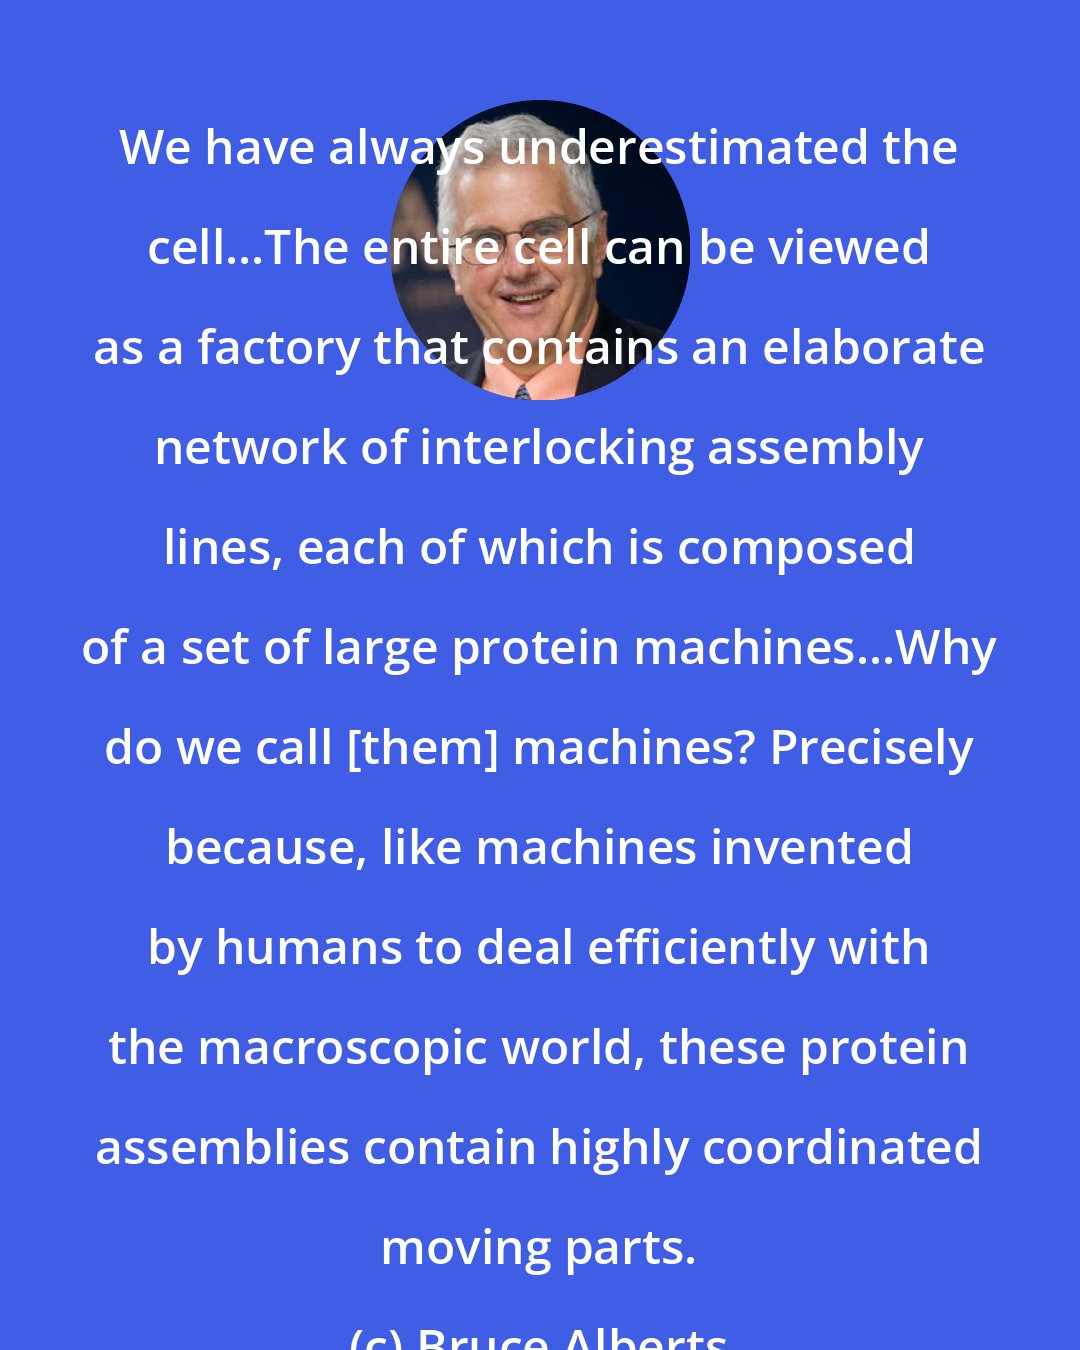 Bruce Alberts: We have always underestimated the cell...The entire cell can be viewed as a factory that contains an elaborate network of interlocking assembly lines, each of which is composed of a set of large protein machines...Why do we call [them] machines? Precisely because, like machines invented by humans to deal efficiently with the macroscopic world, these protein assemblies contain highly coordinated moving parts.